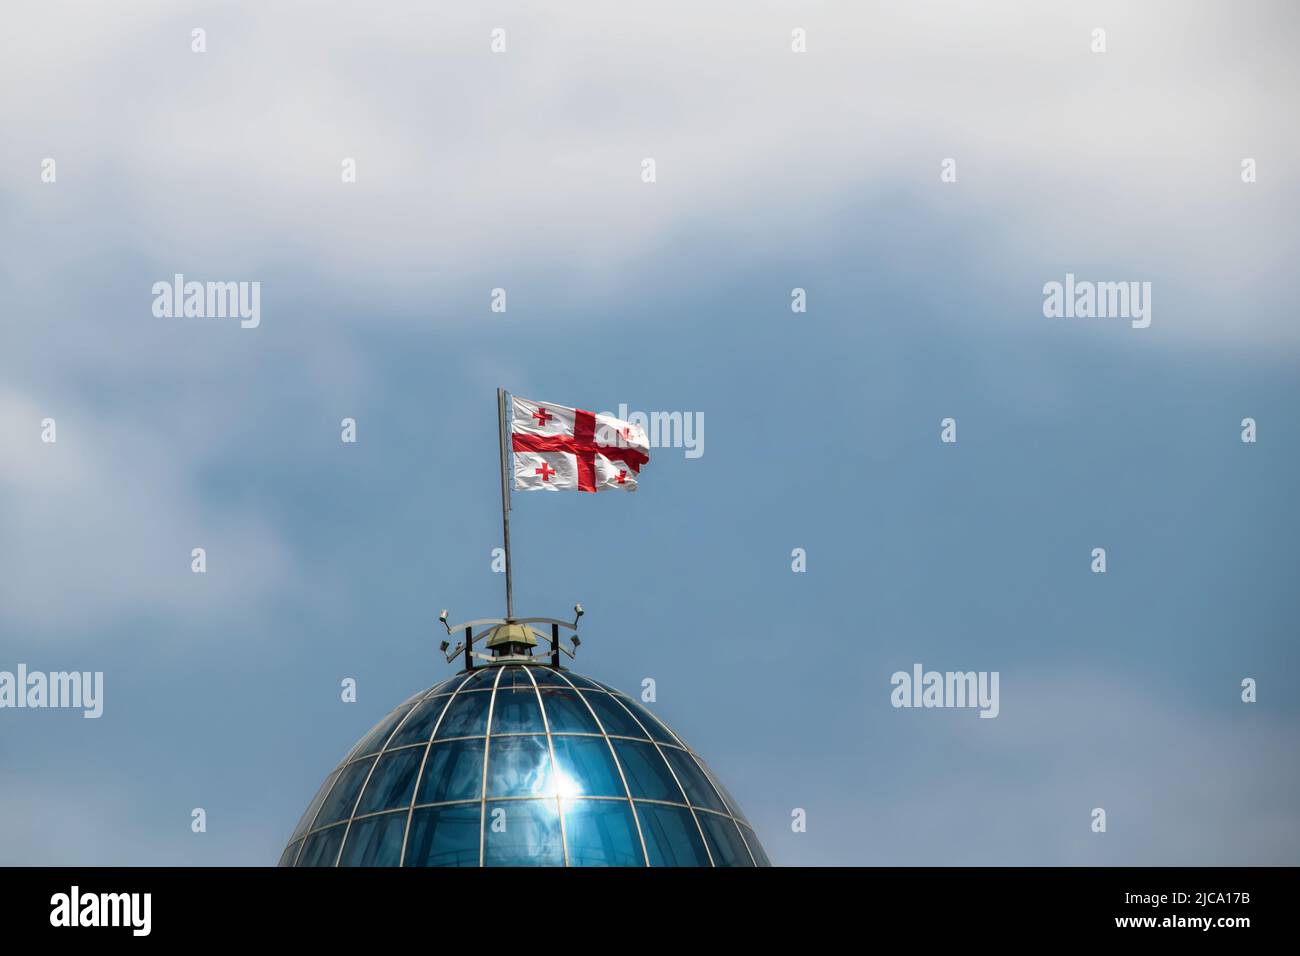 Close-up of flag of Republic of Georgia blowing in the wind on top of the dome of the capital in Tbilisi with a blue cloudy sky behind - Room for copy Stock Photo